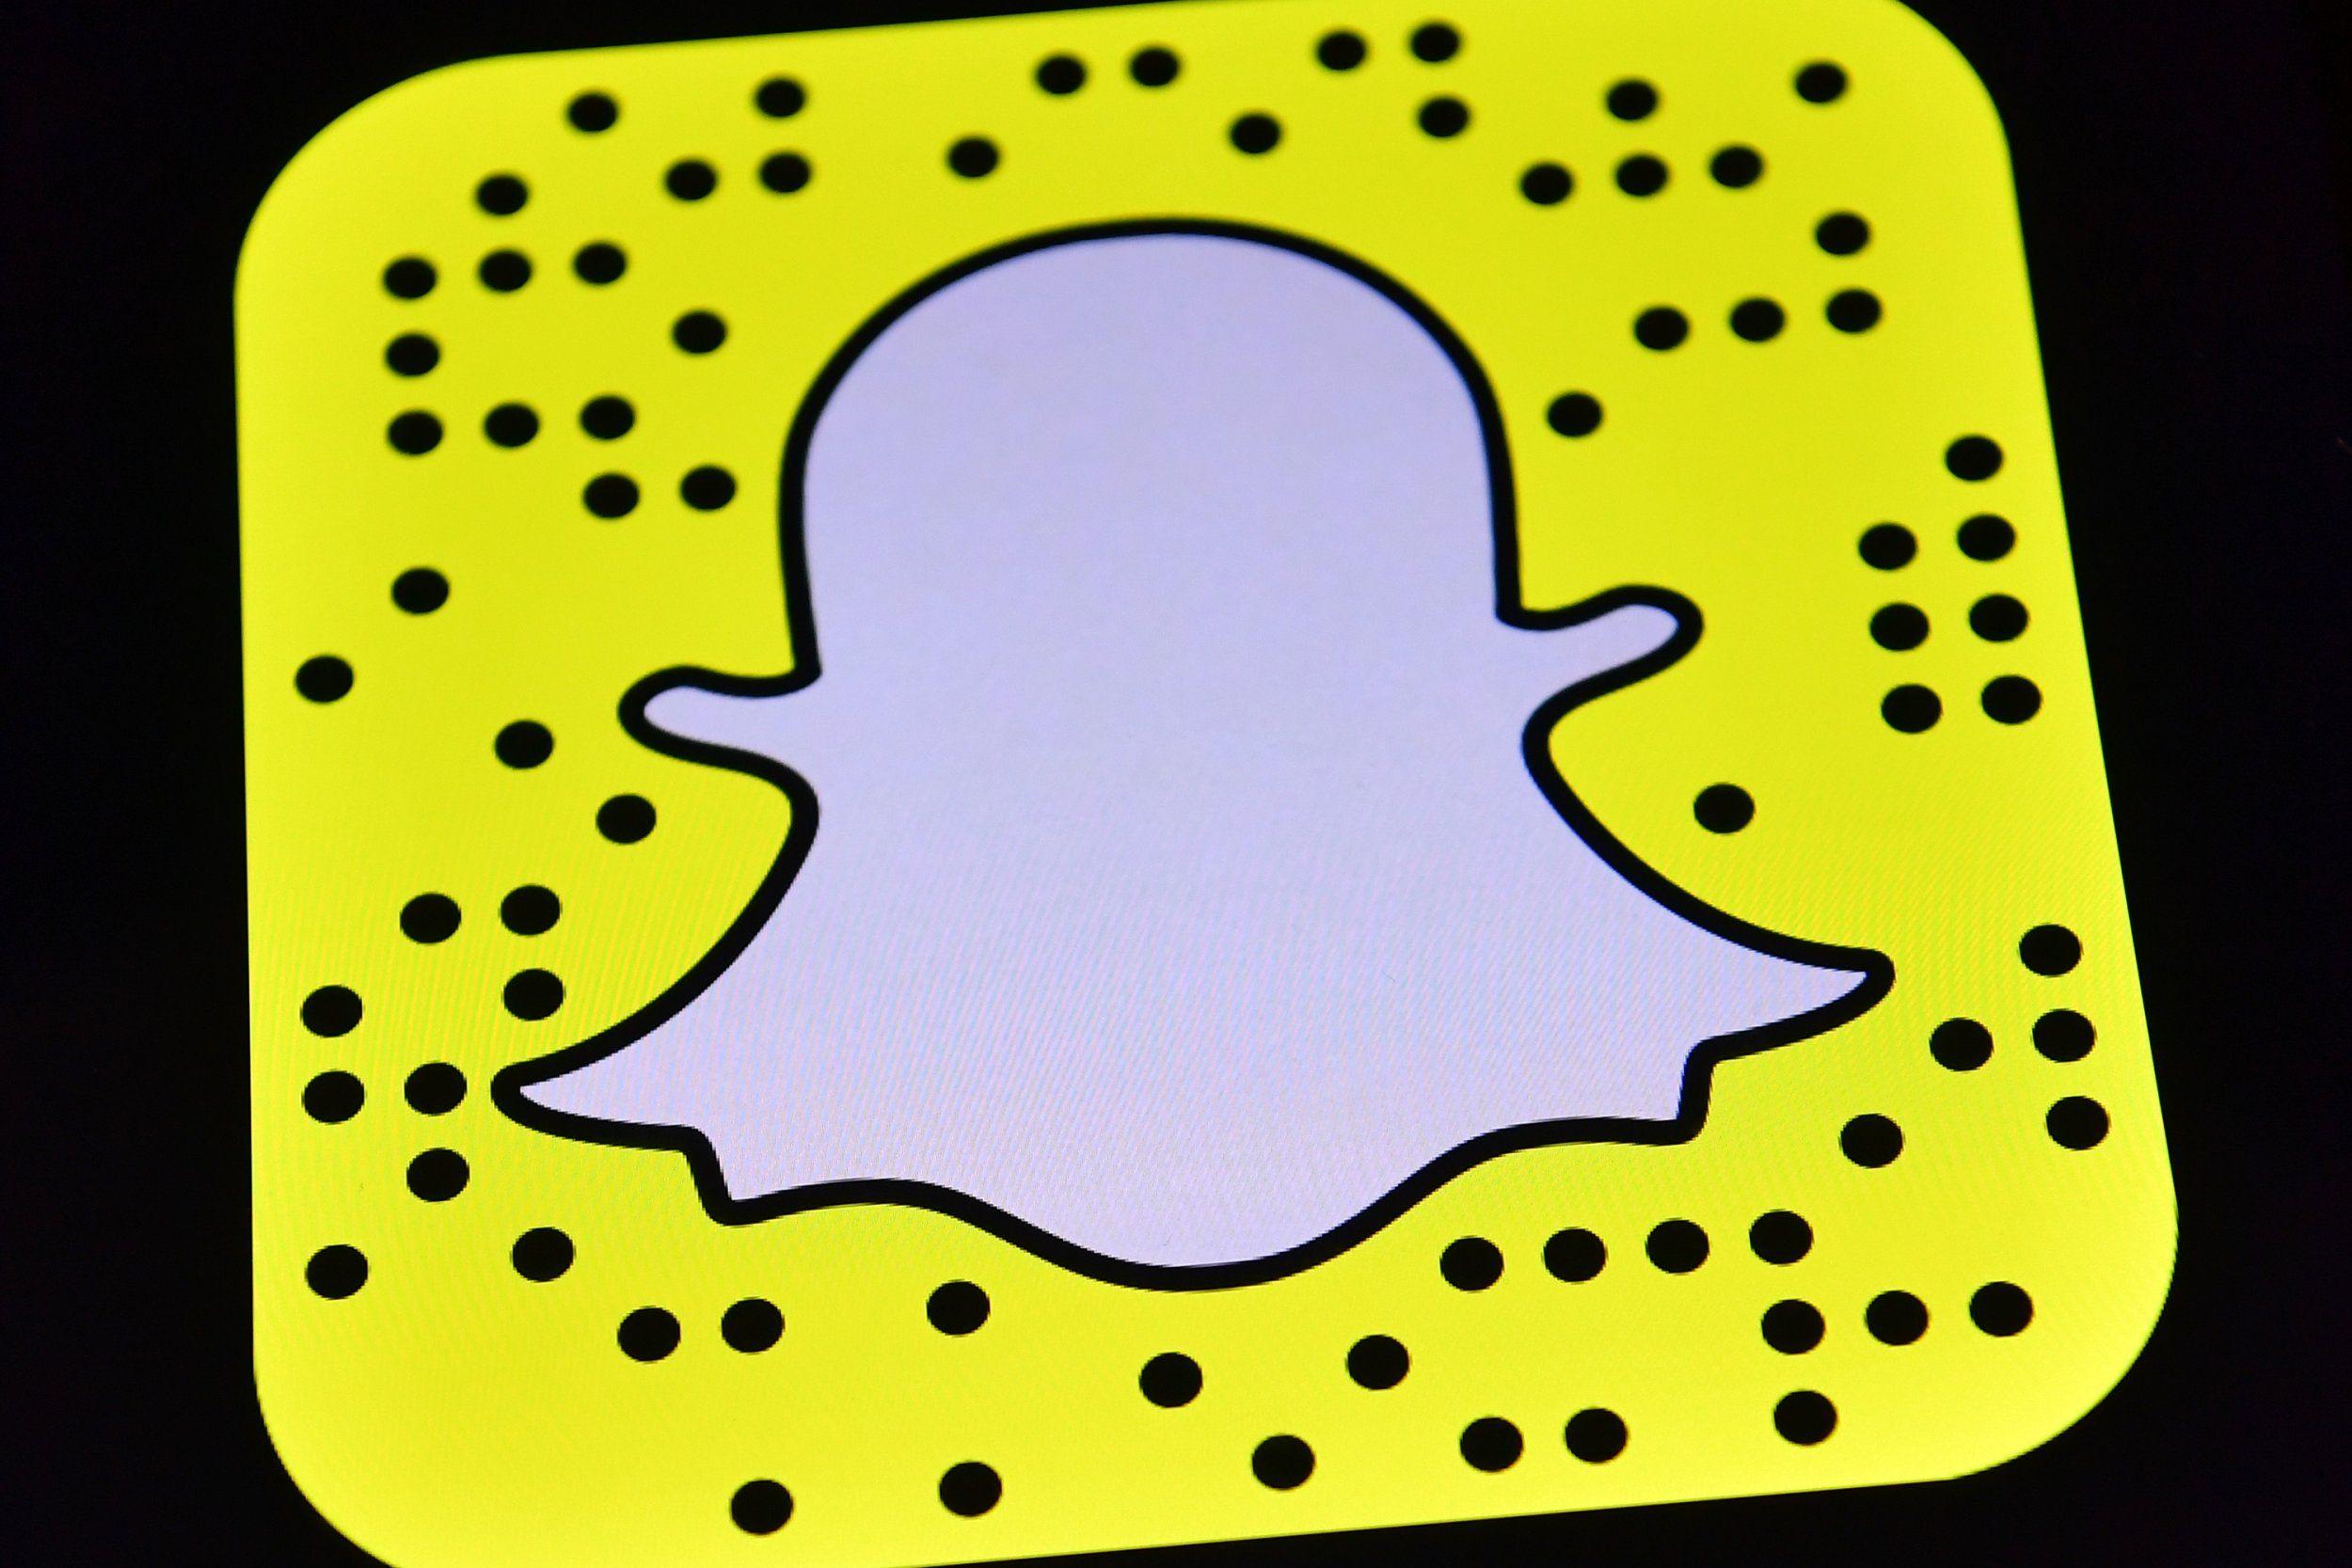 Snap Logo - Snapchat Emoji, Icon Meanings: Yellow and Red Hearts, Sunglasses